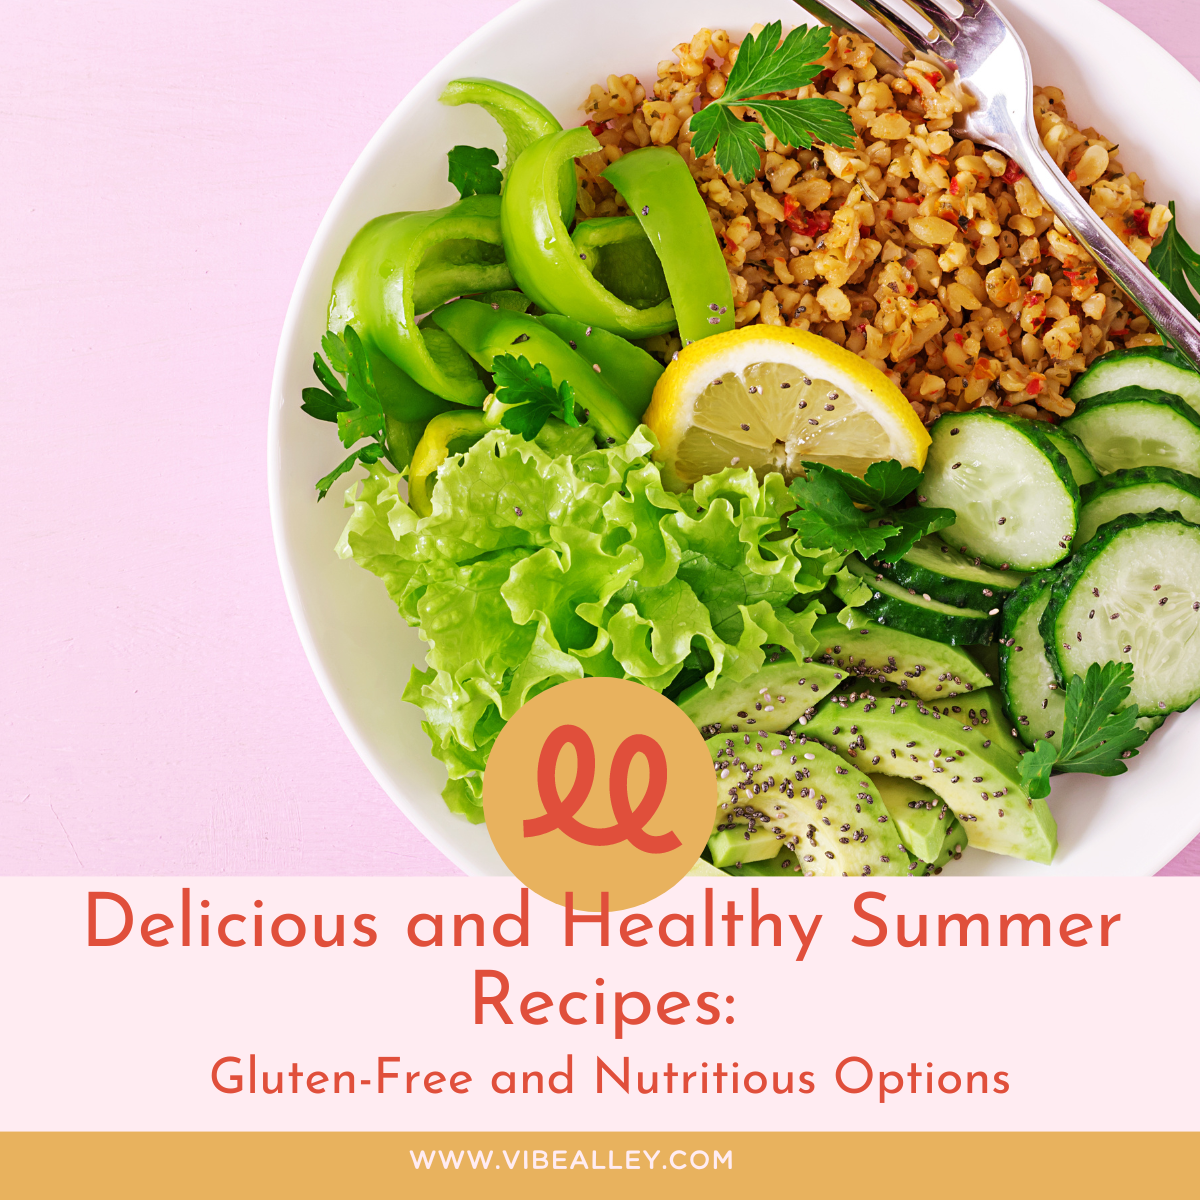 Delicious and Healthy Summer Recipes for Moms and Daughters: Gluten-Free and Nutritious Options